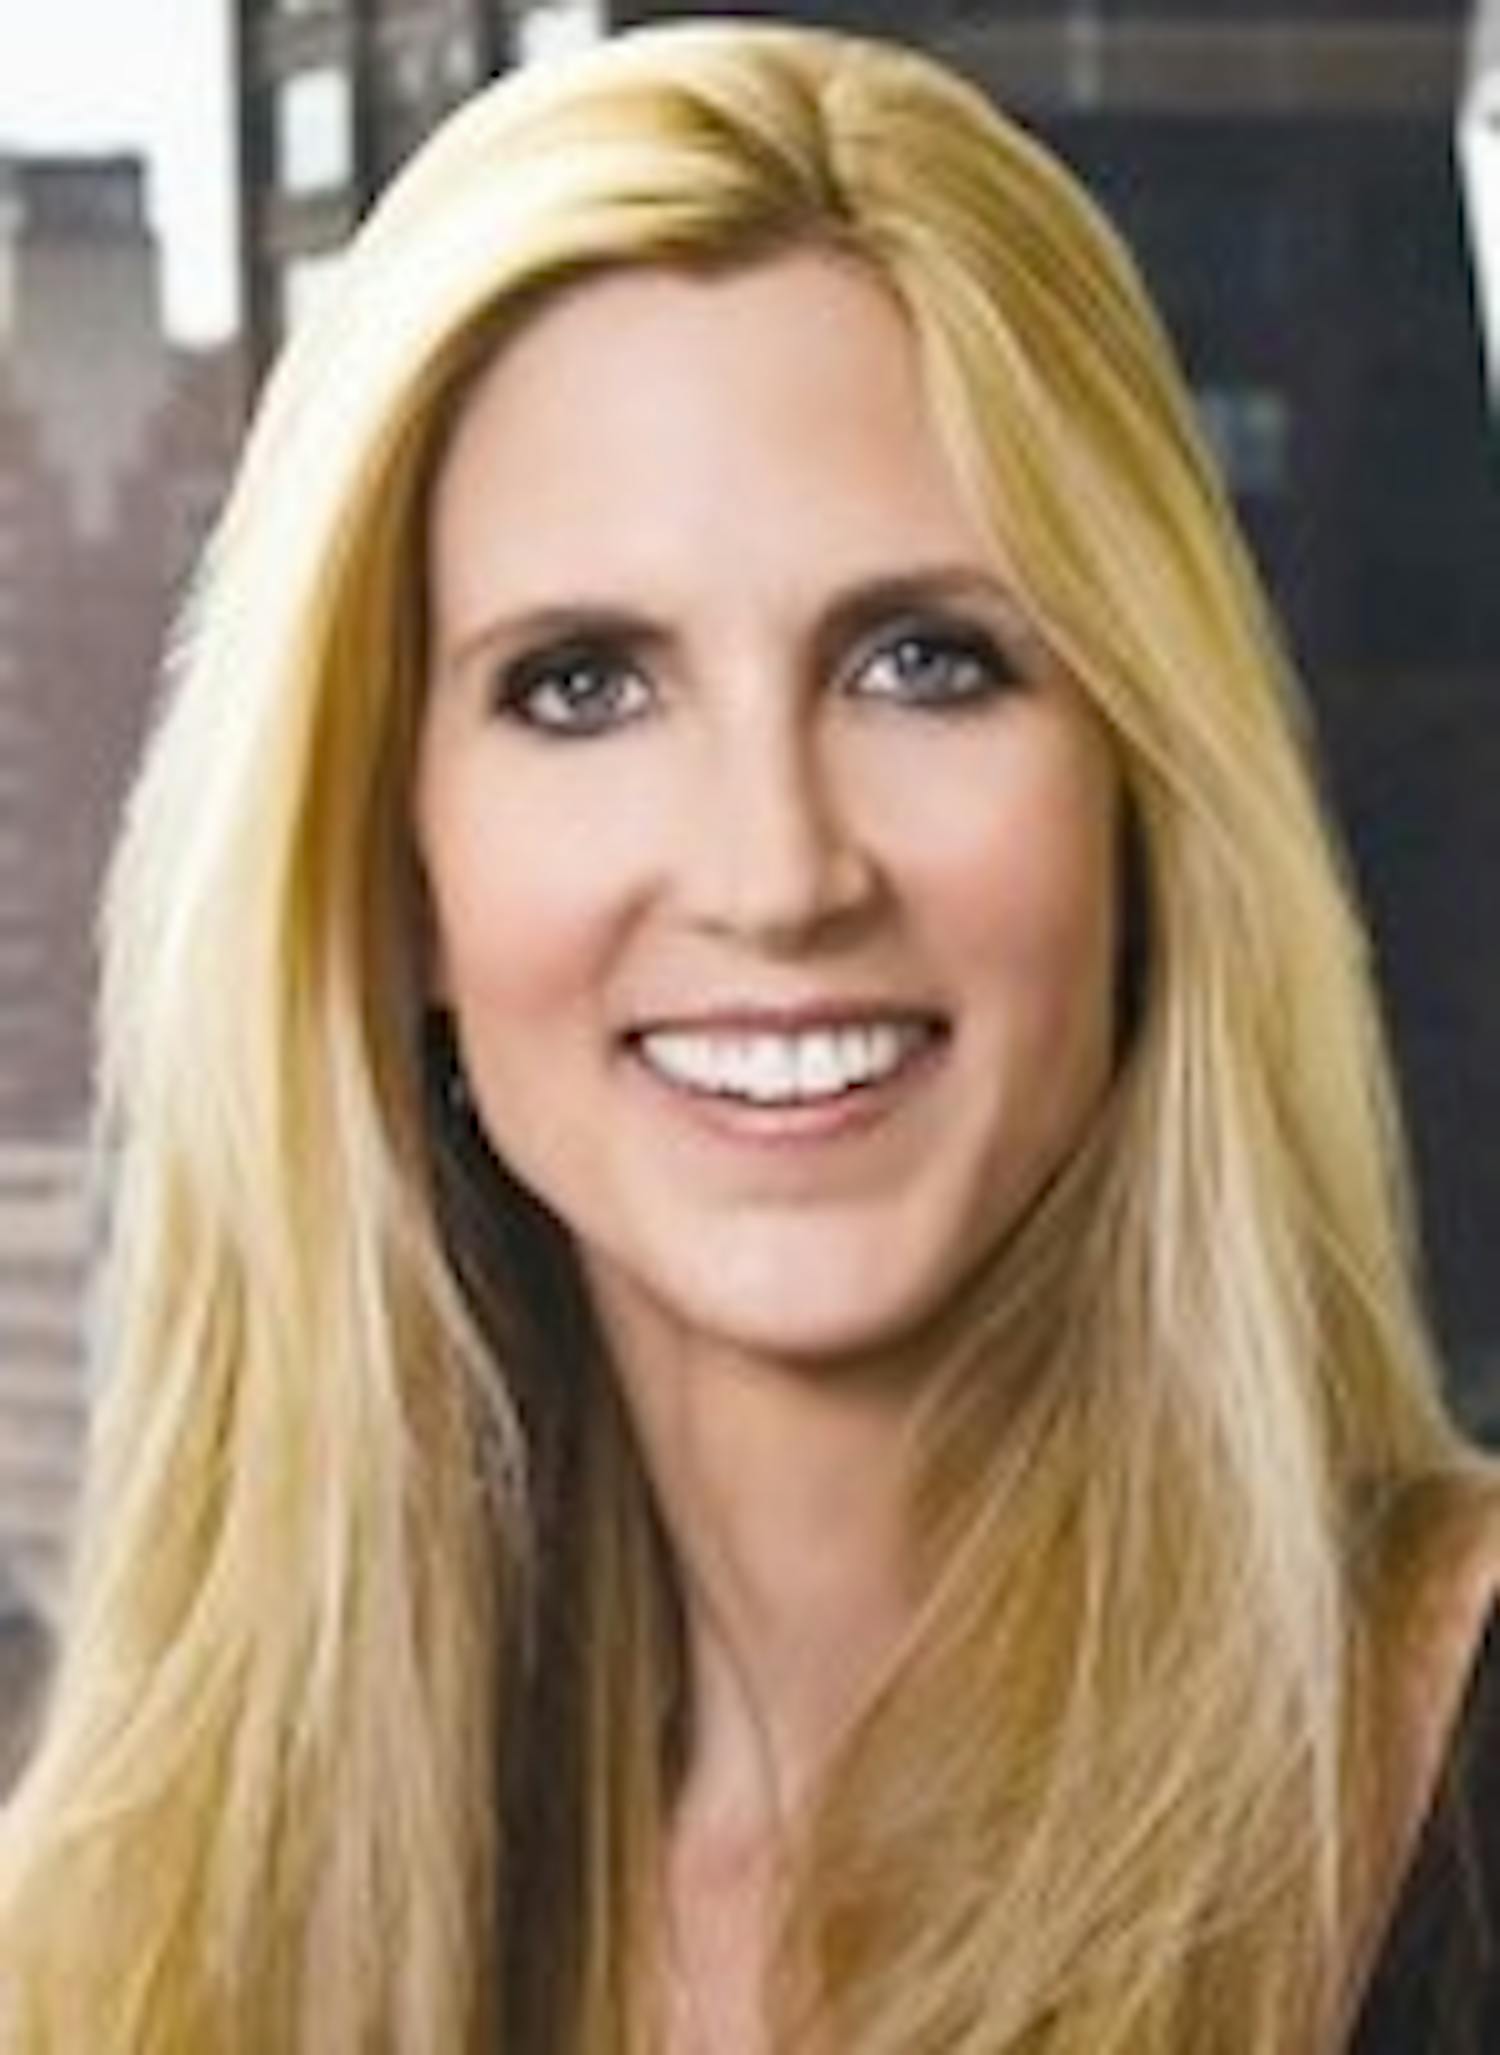 Photo: Ann Coulter speech still possible at UNC (Josie Hollingsworth)